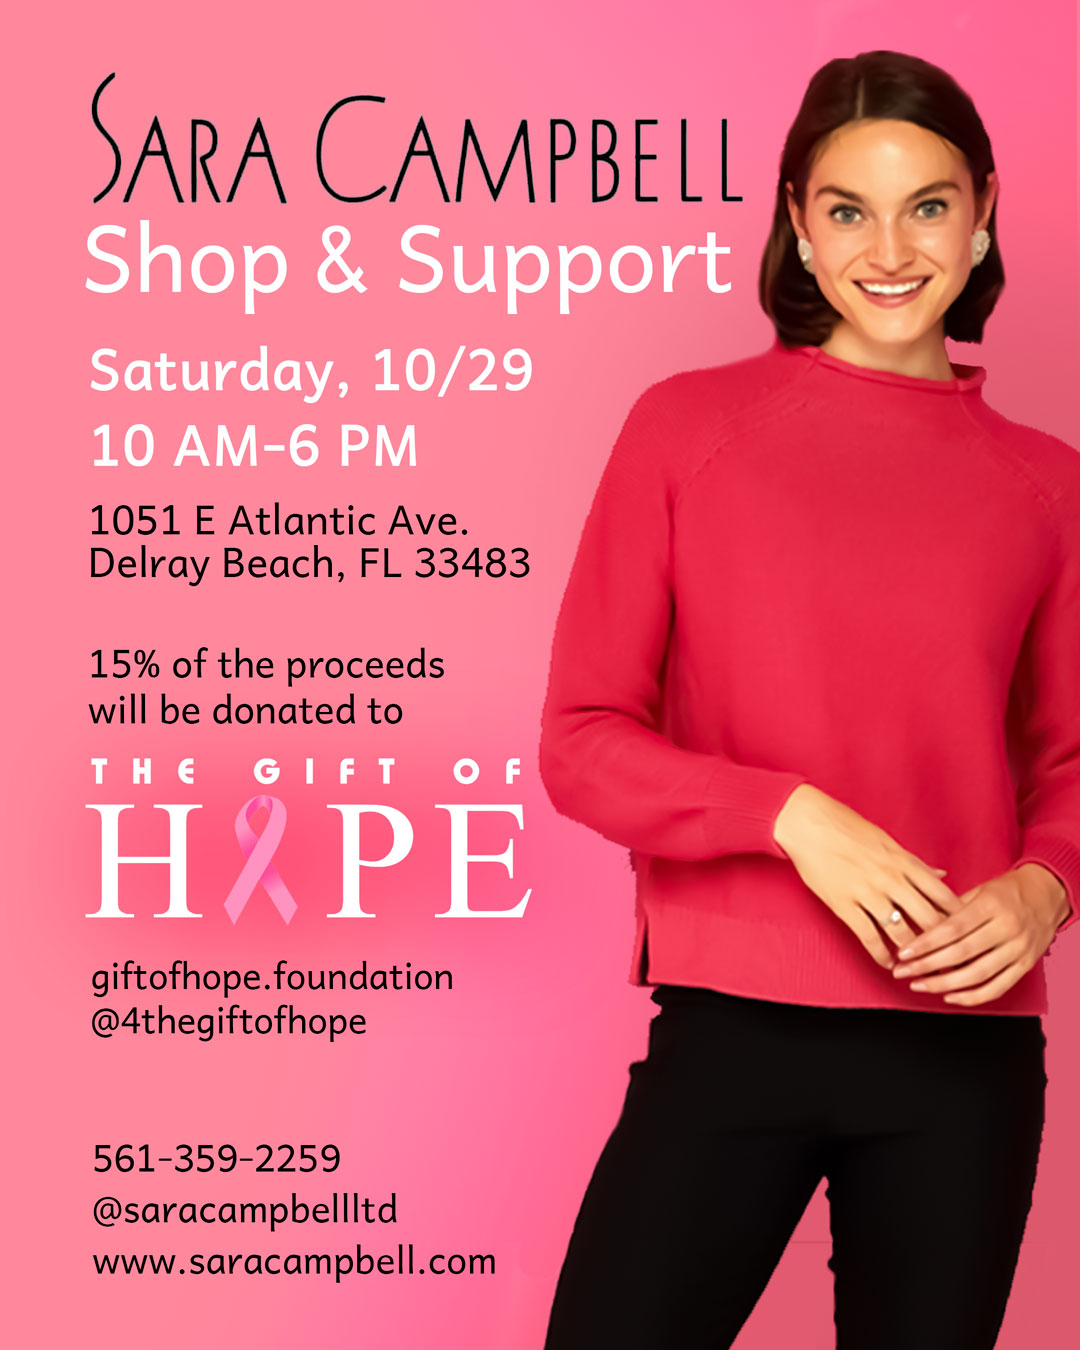 sara Campbell Shop & Support - Gift of Hope Foundation